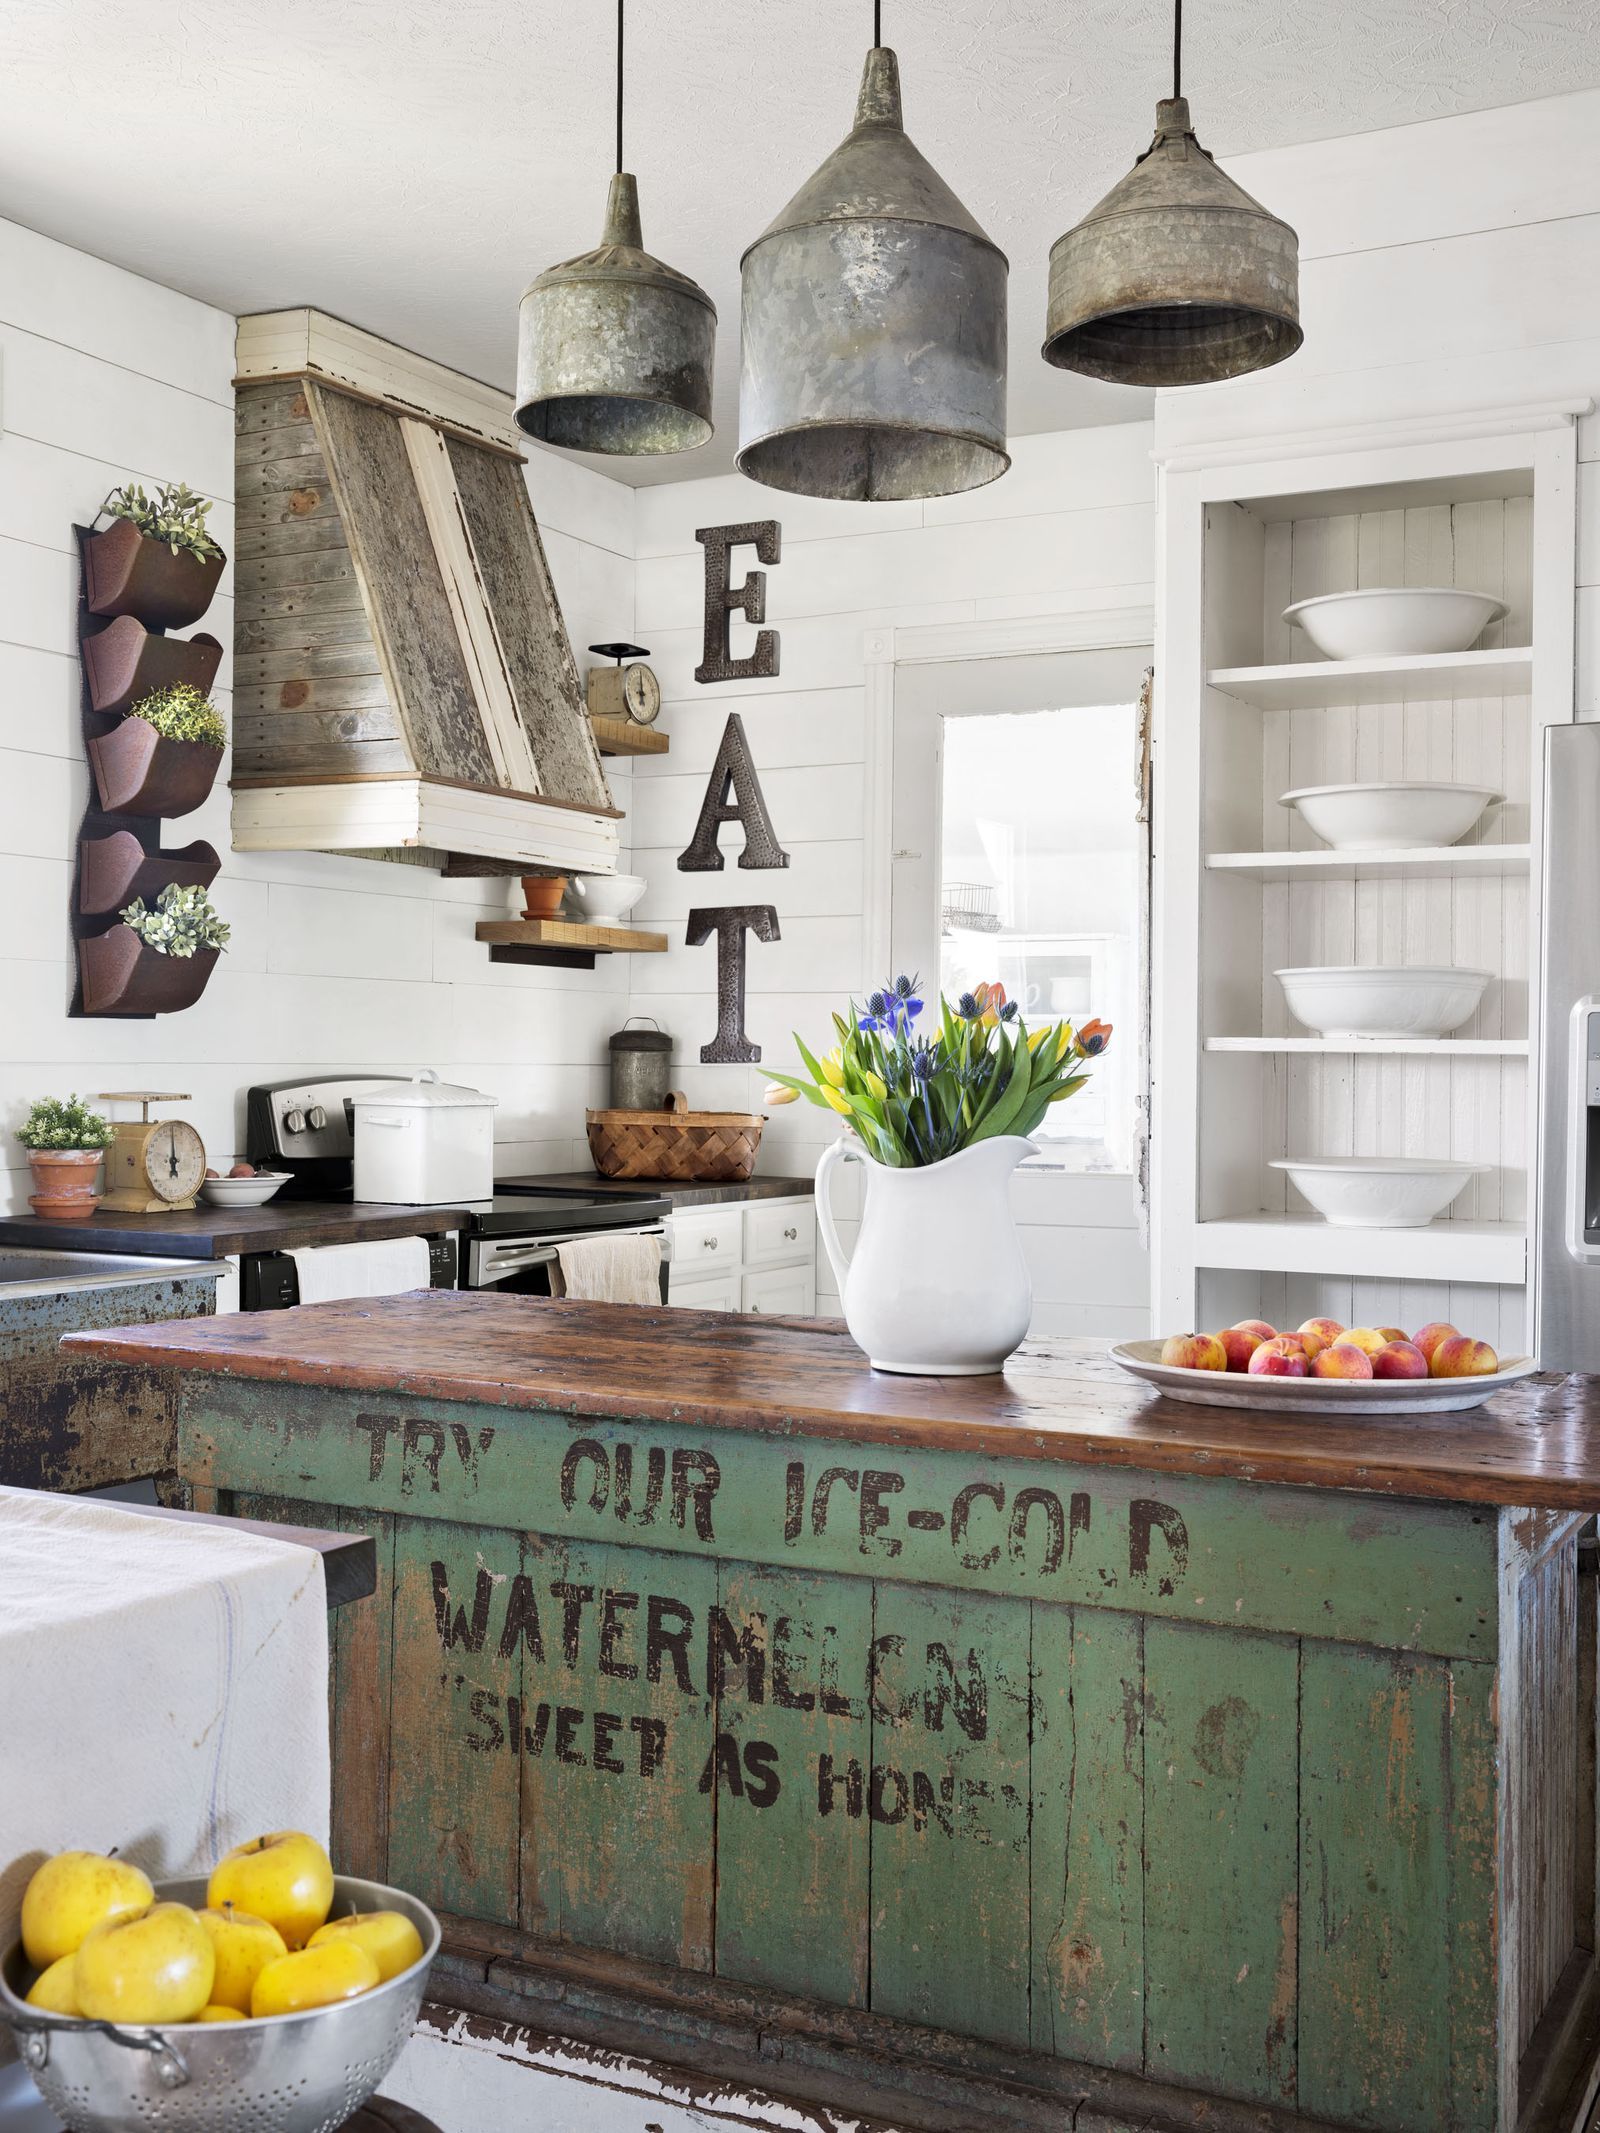 These Rustic Farmhouse Kitchens Will Inspire You to Renovate